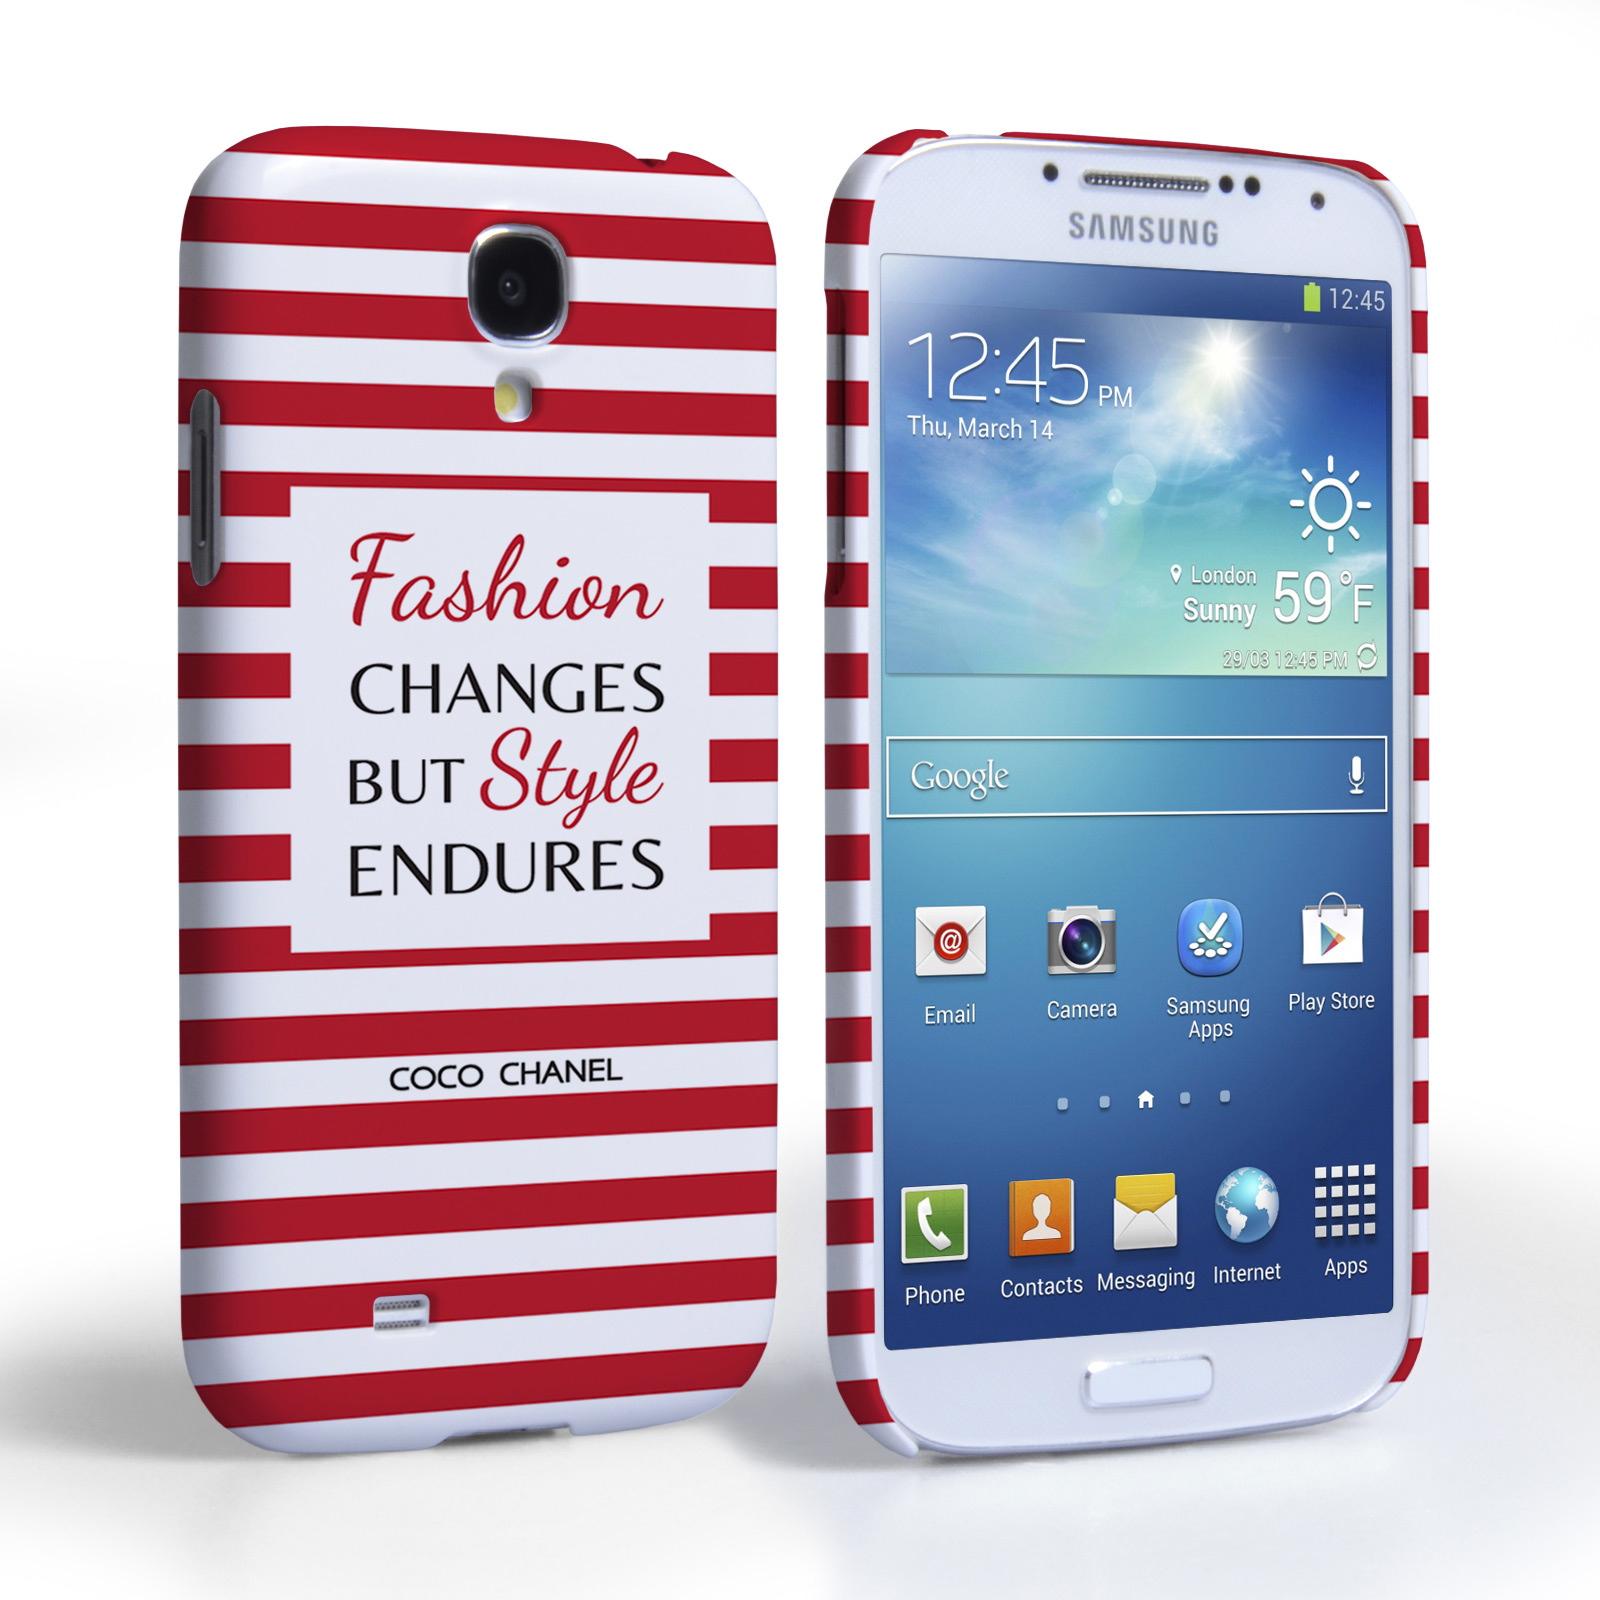 Caseflex Samsung Galaxy S4 Chanel ‘Fashion Changes’ Quote Case – Red and White